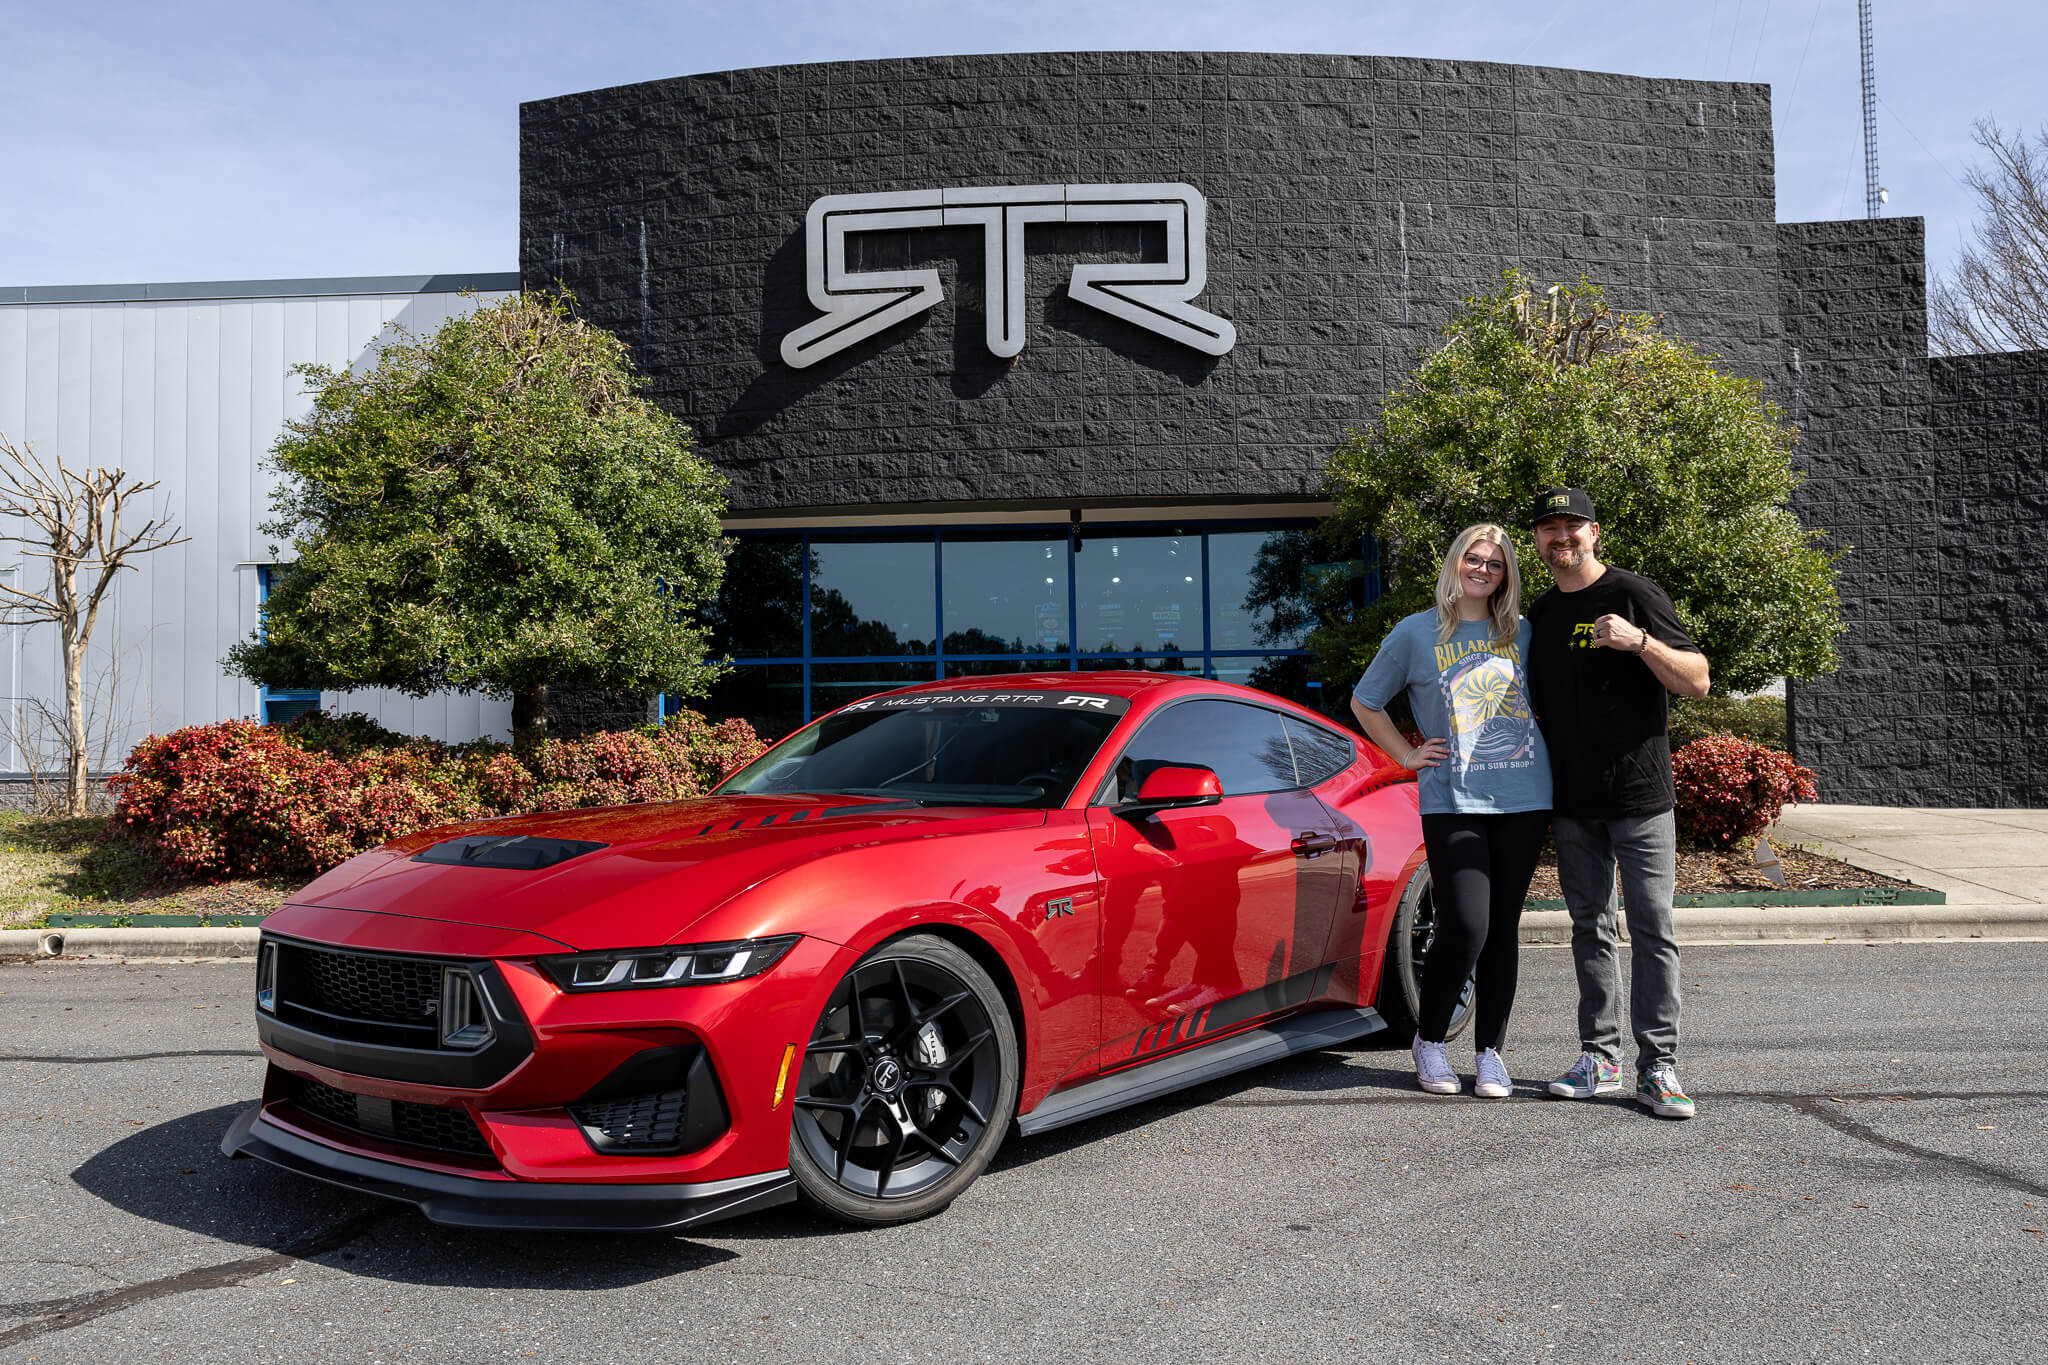 Vaughn takes a photo with a new RTR owner at the RTR Lab